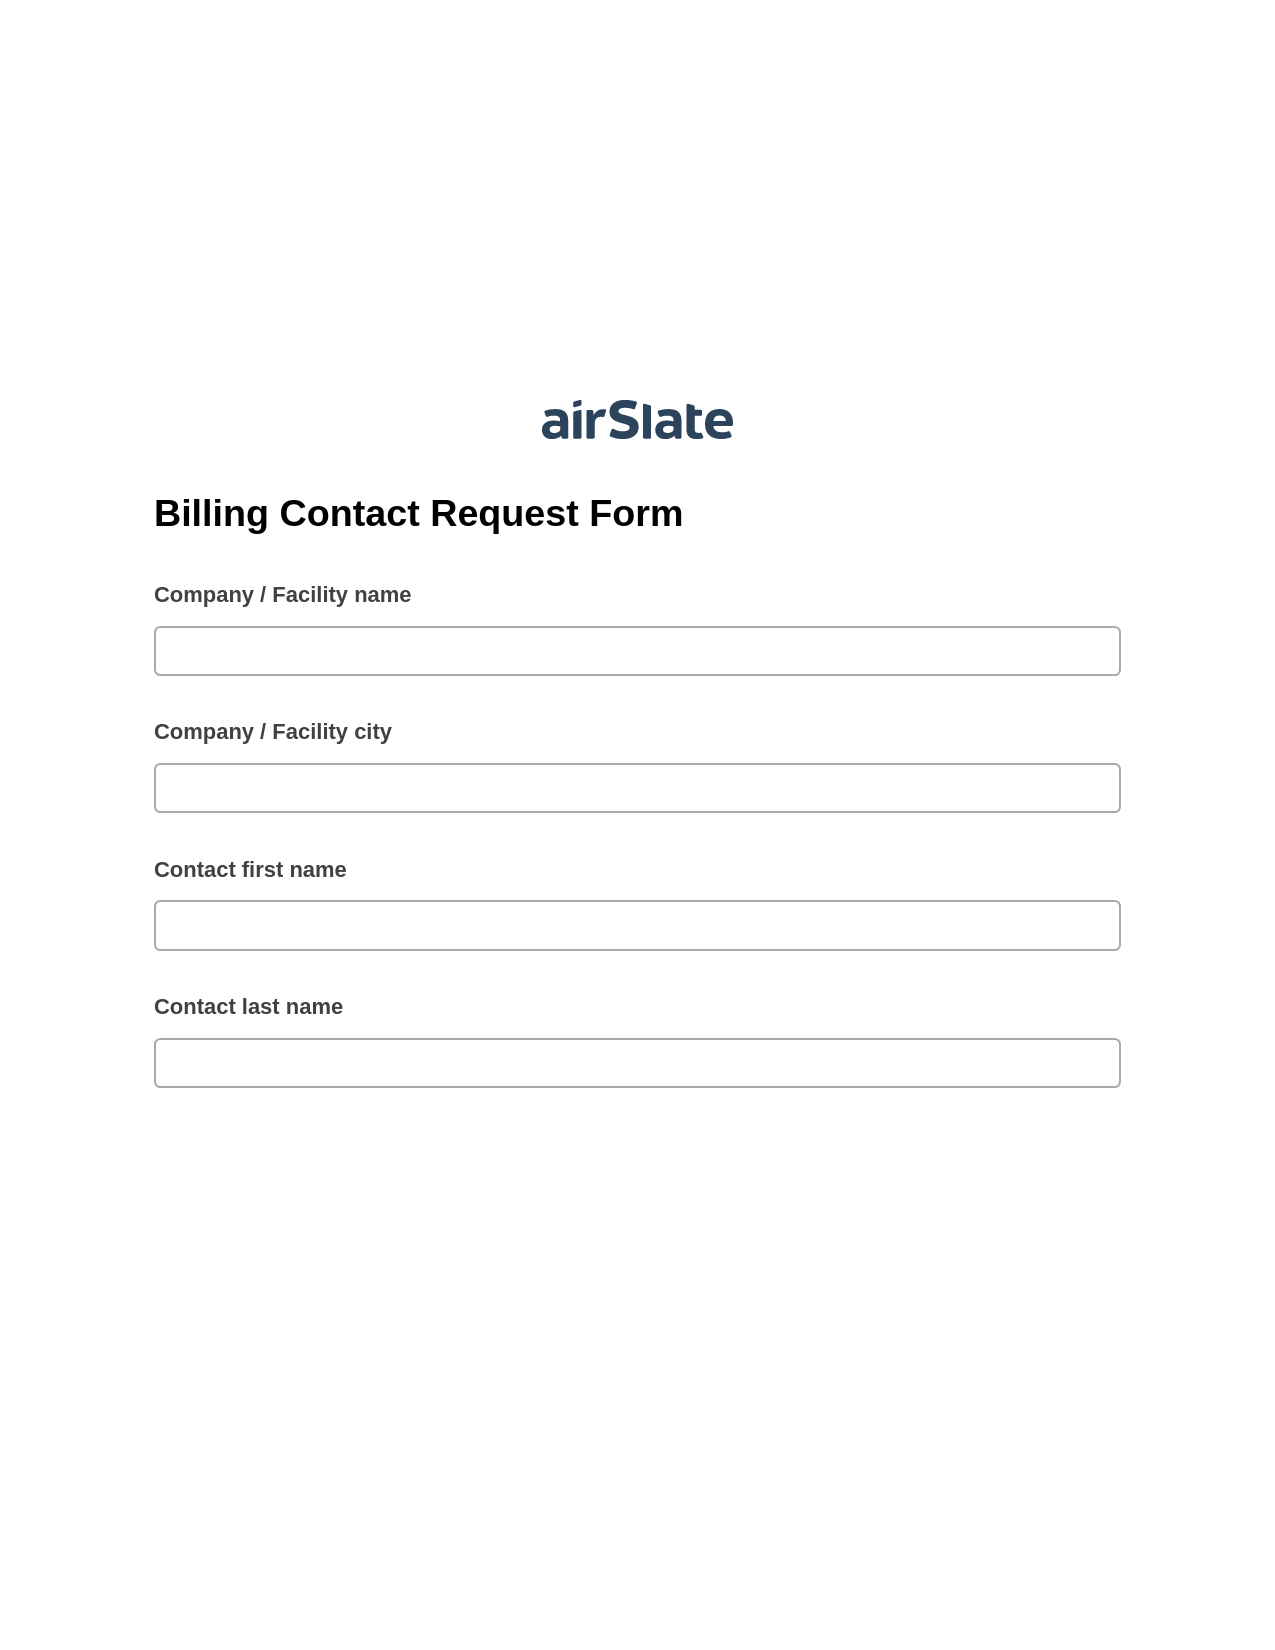 Multirole Billing Contact Request Form Pre-fill Document Bot, Remove Slate Bot, Email Notification Postfinish Bot